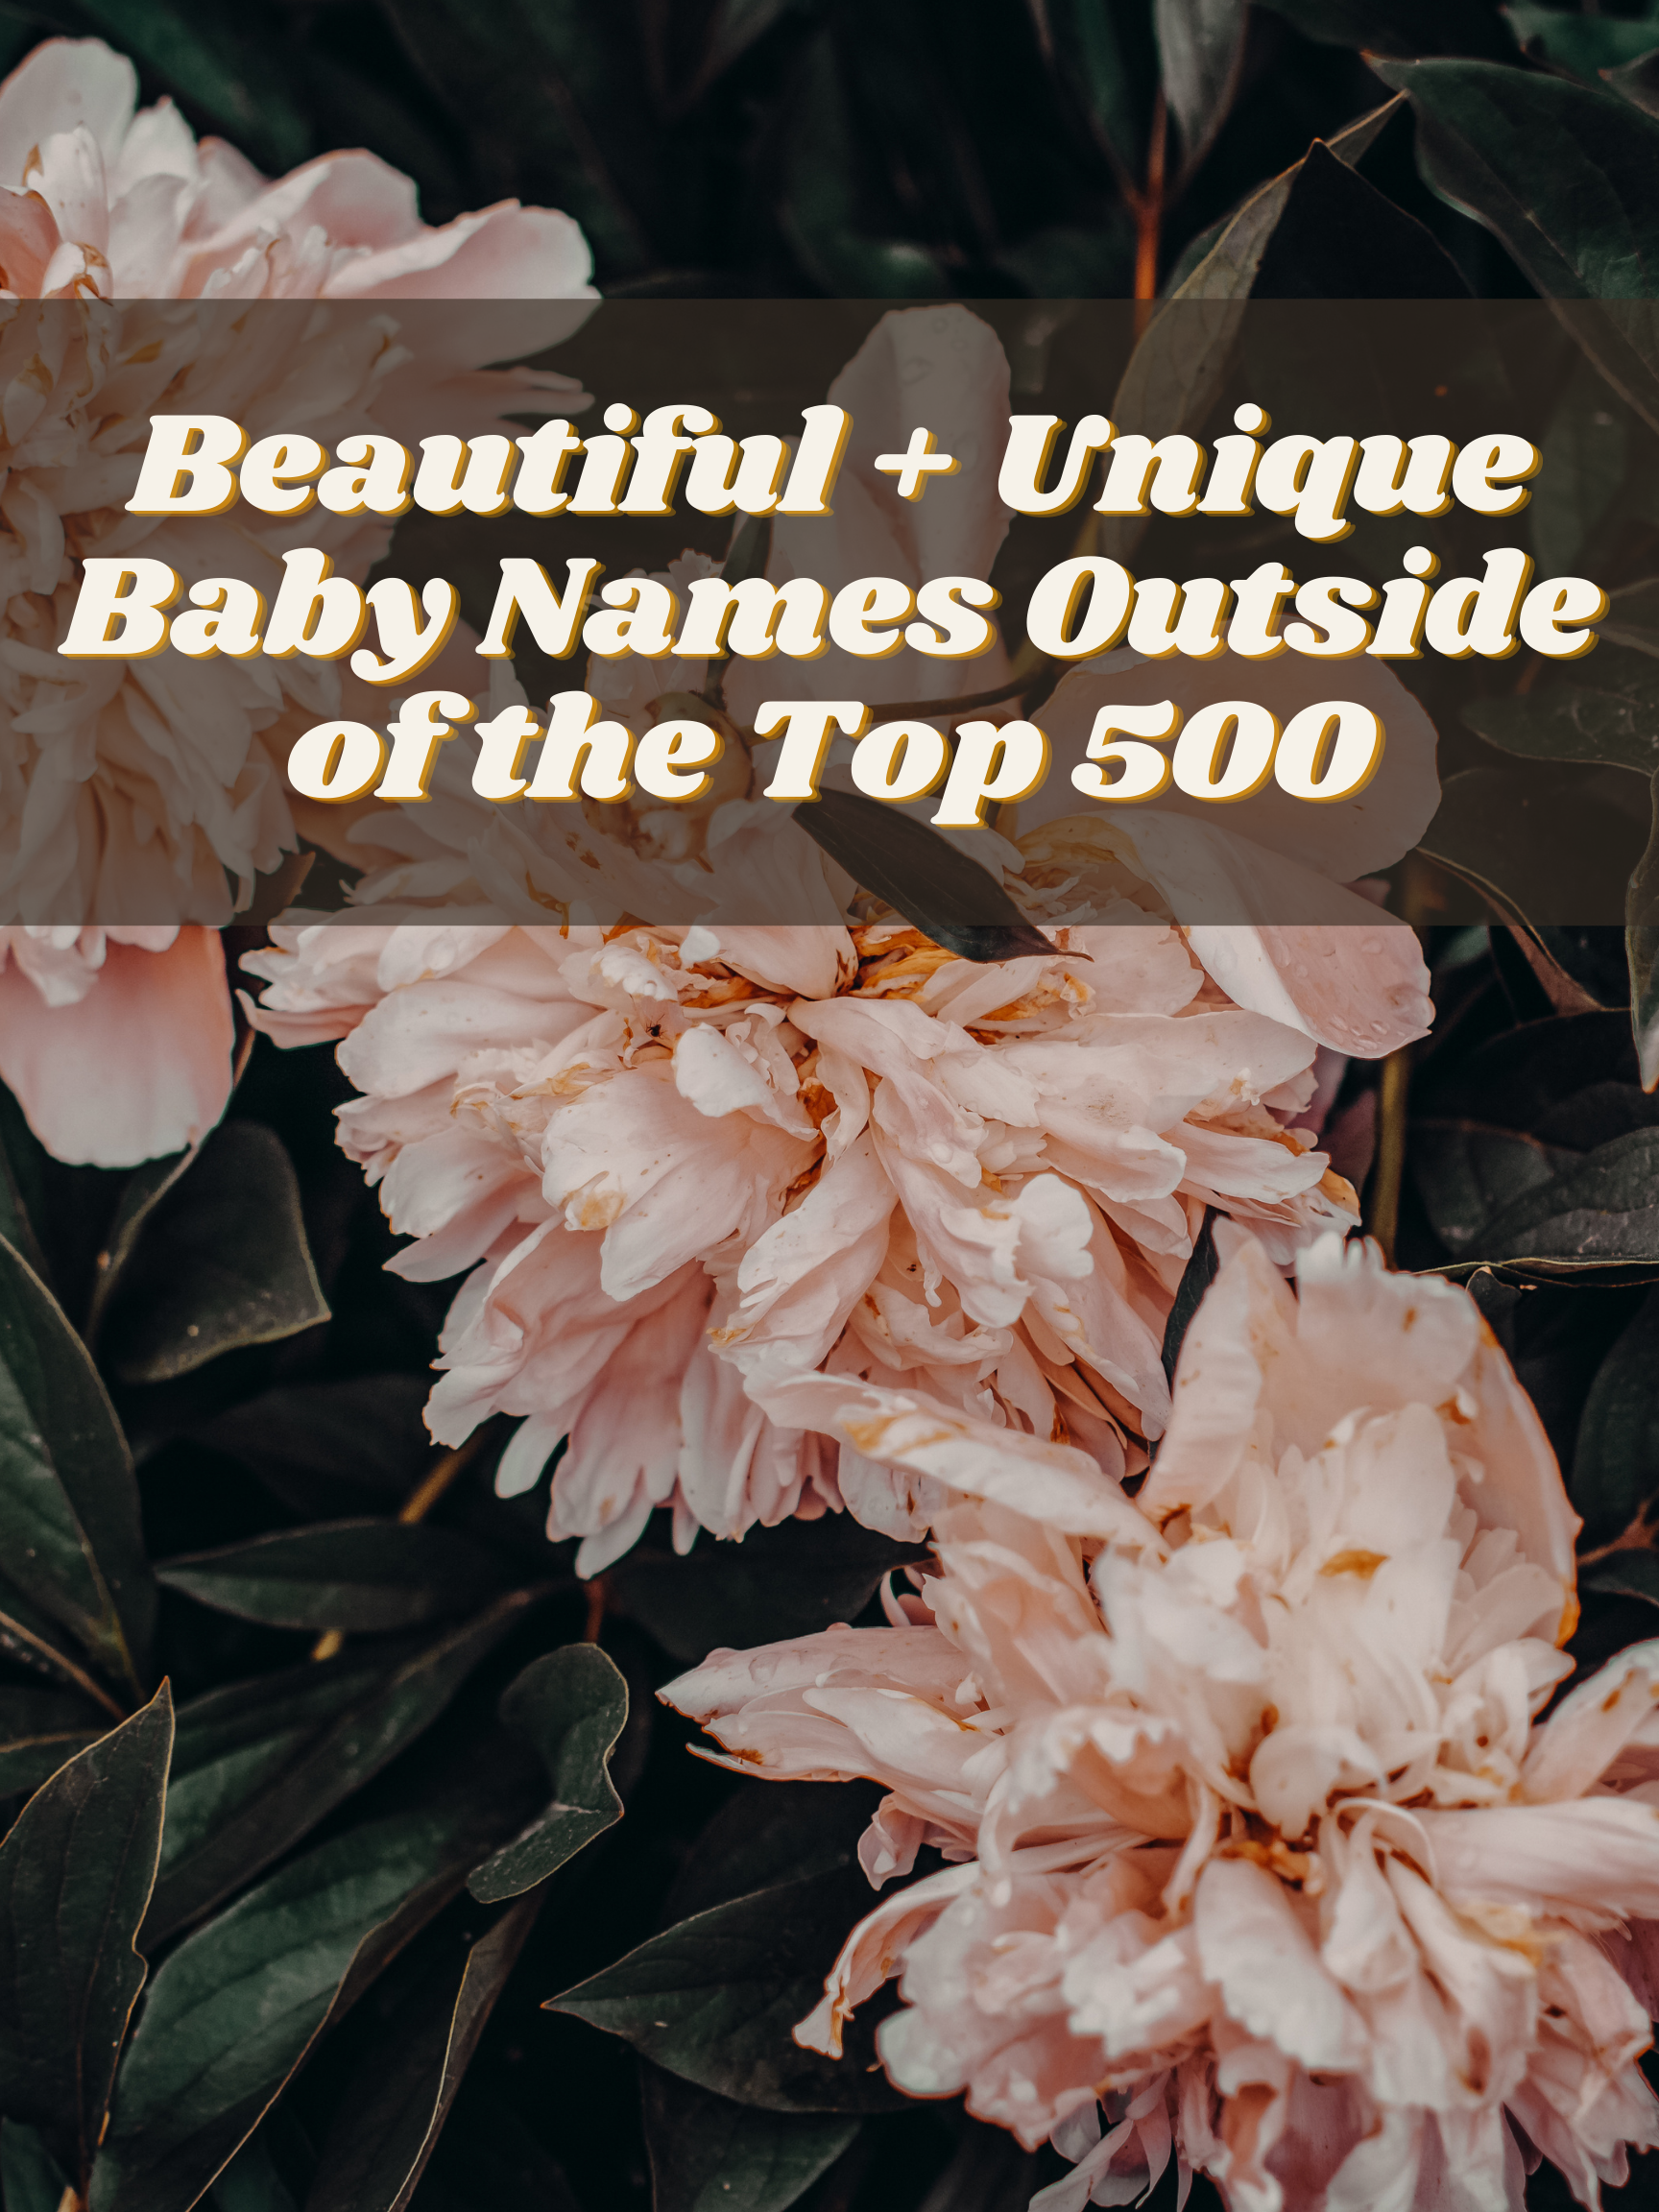 Beautiful + Unique Baby Names Outside of the Top 500